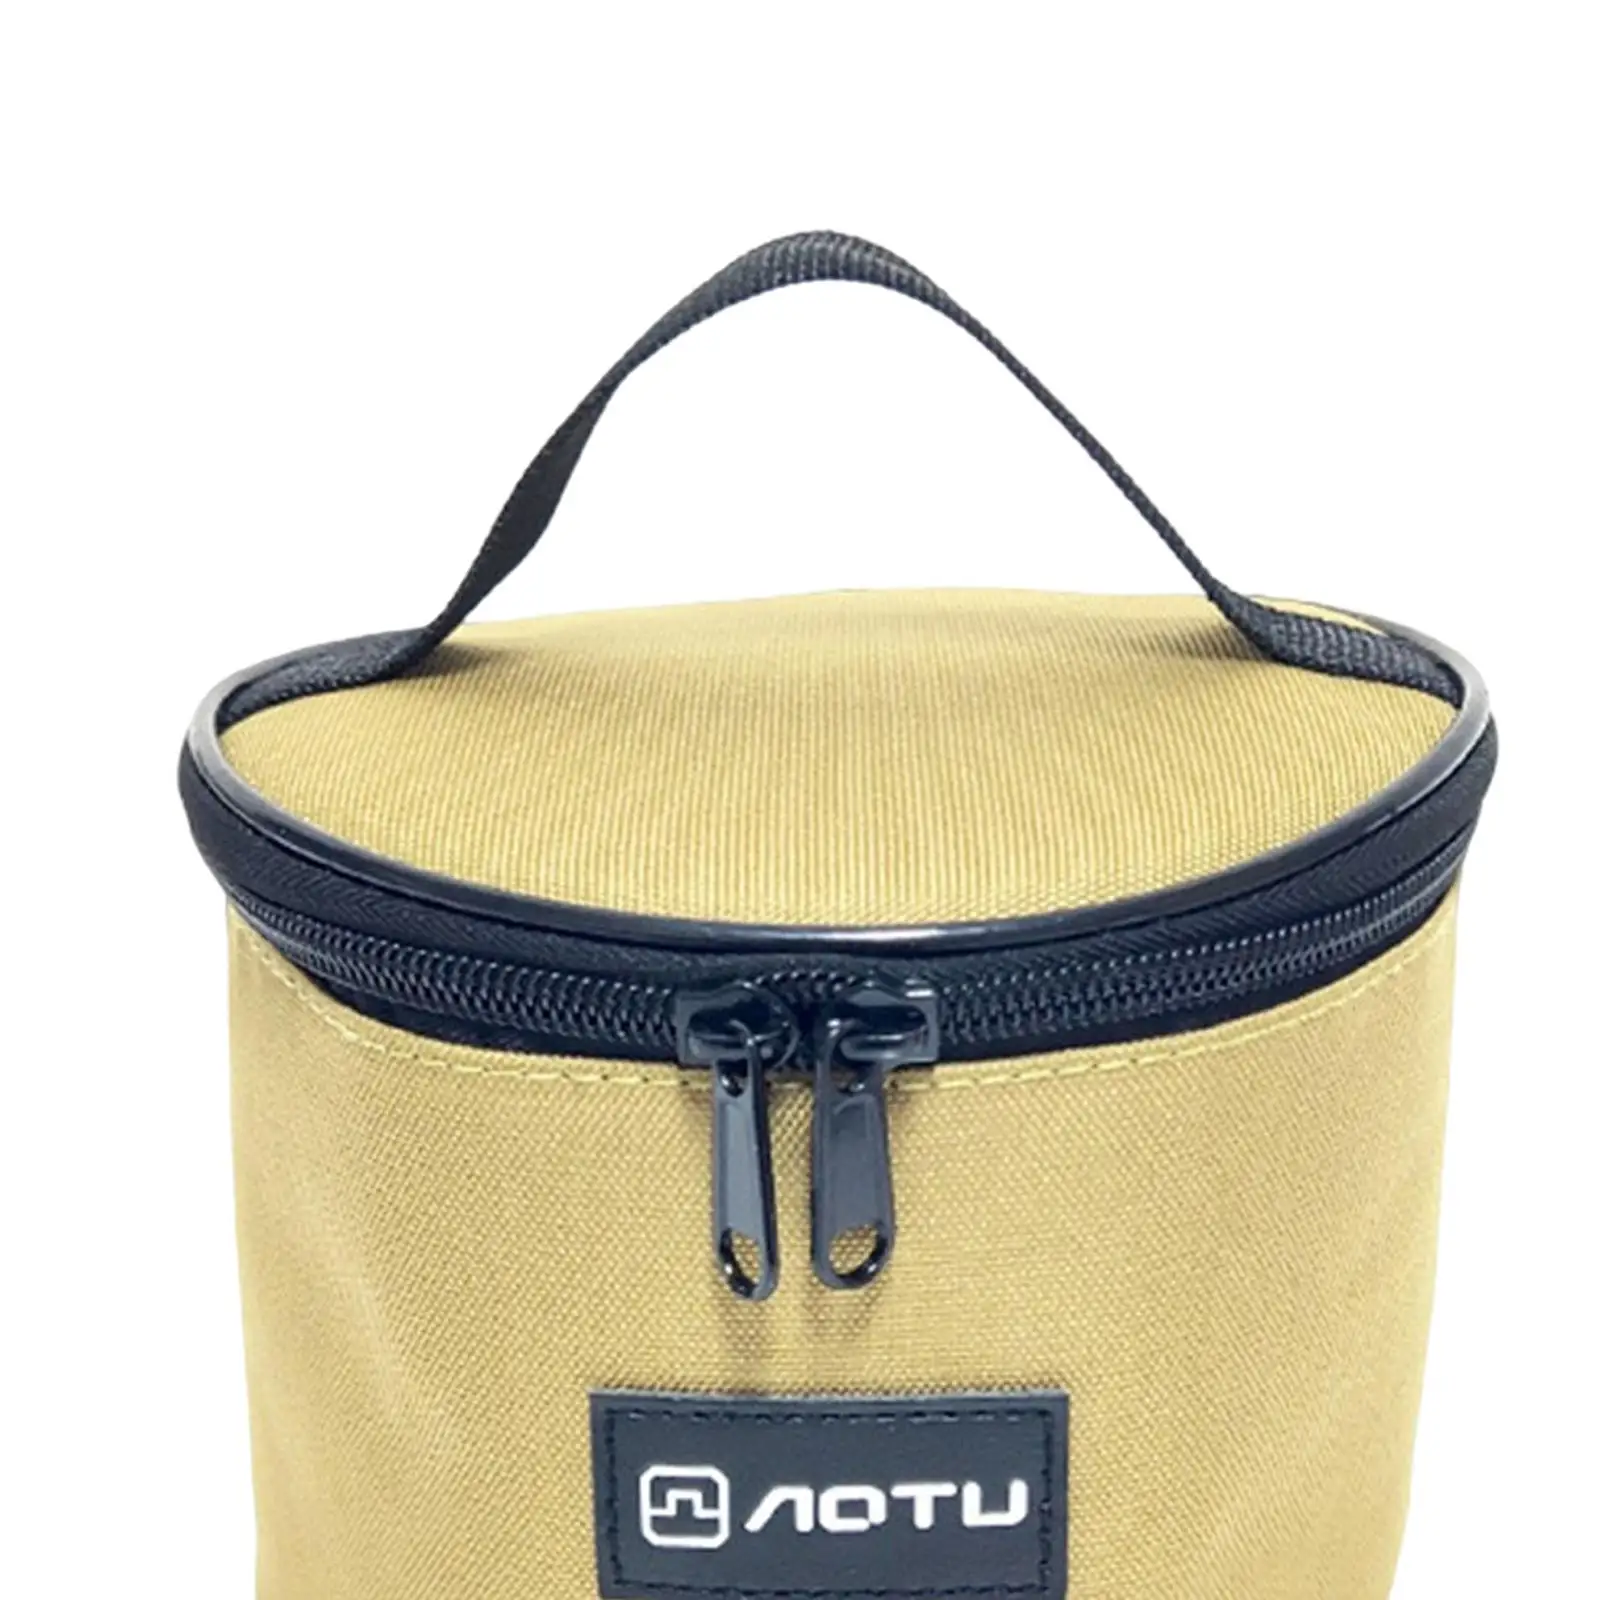 Bowl Storage Bag Waterproof Fishing with Handle Activities Carry